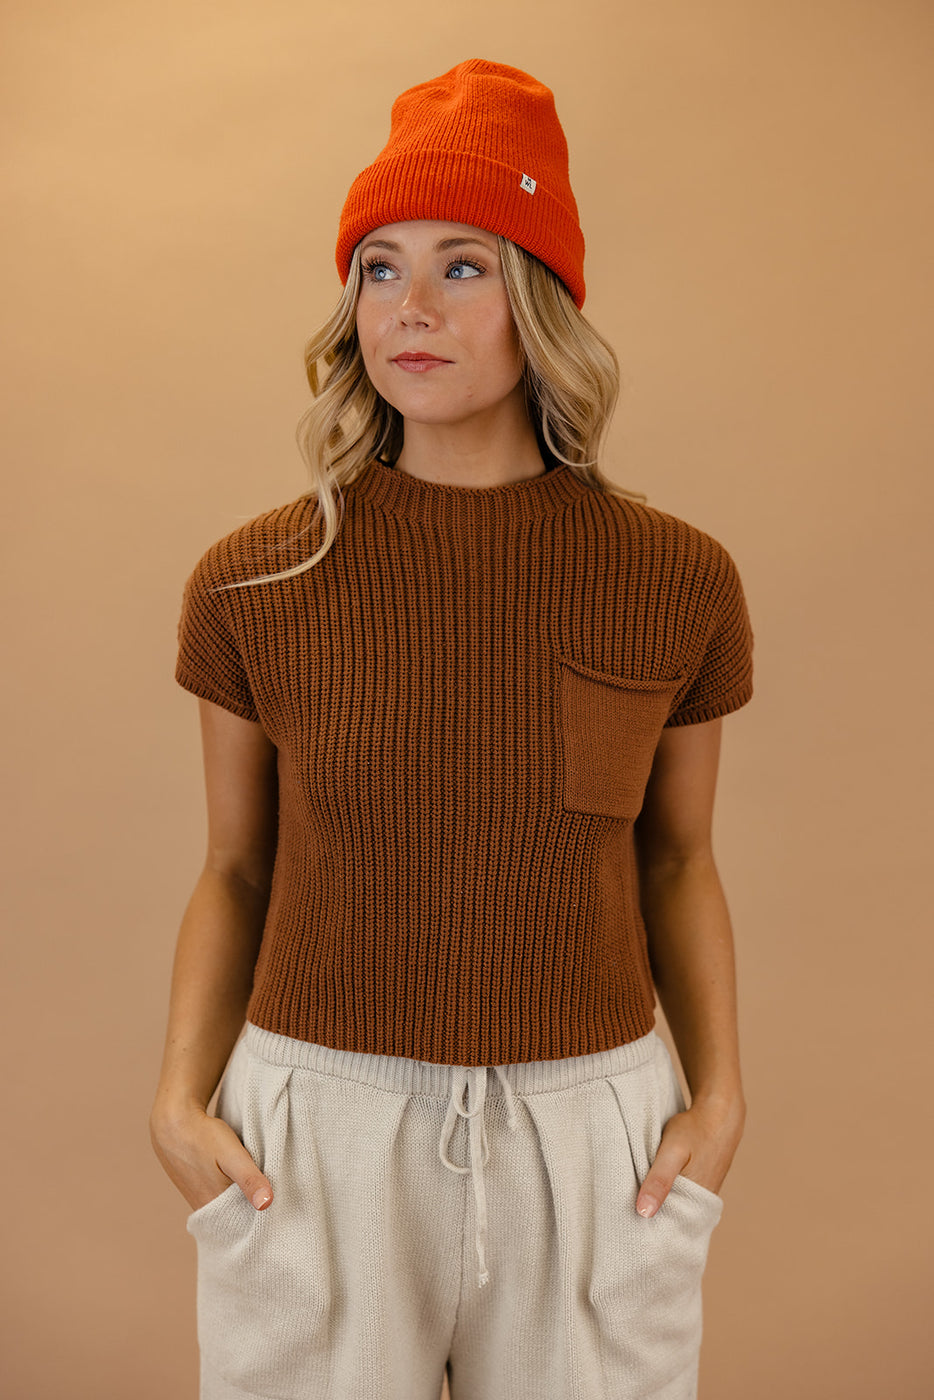 Come Together Knit Sweater